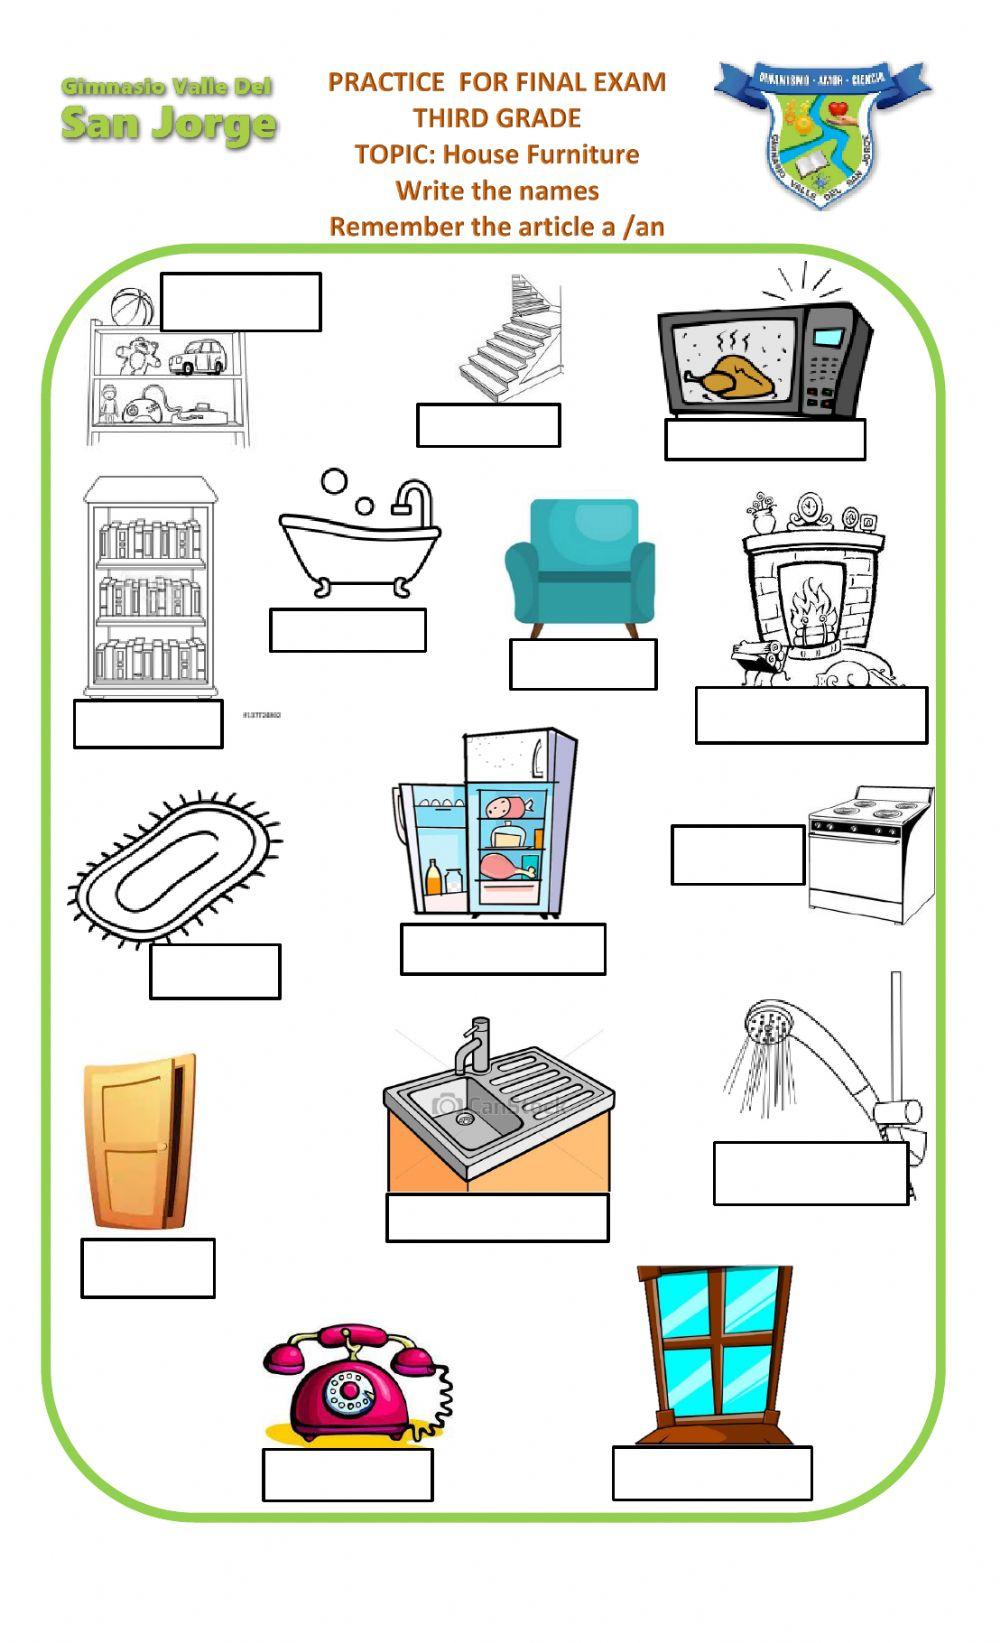 Find Household Items with Pictures - ESL worksheet by aysun0687